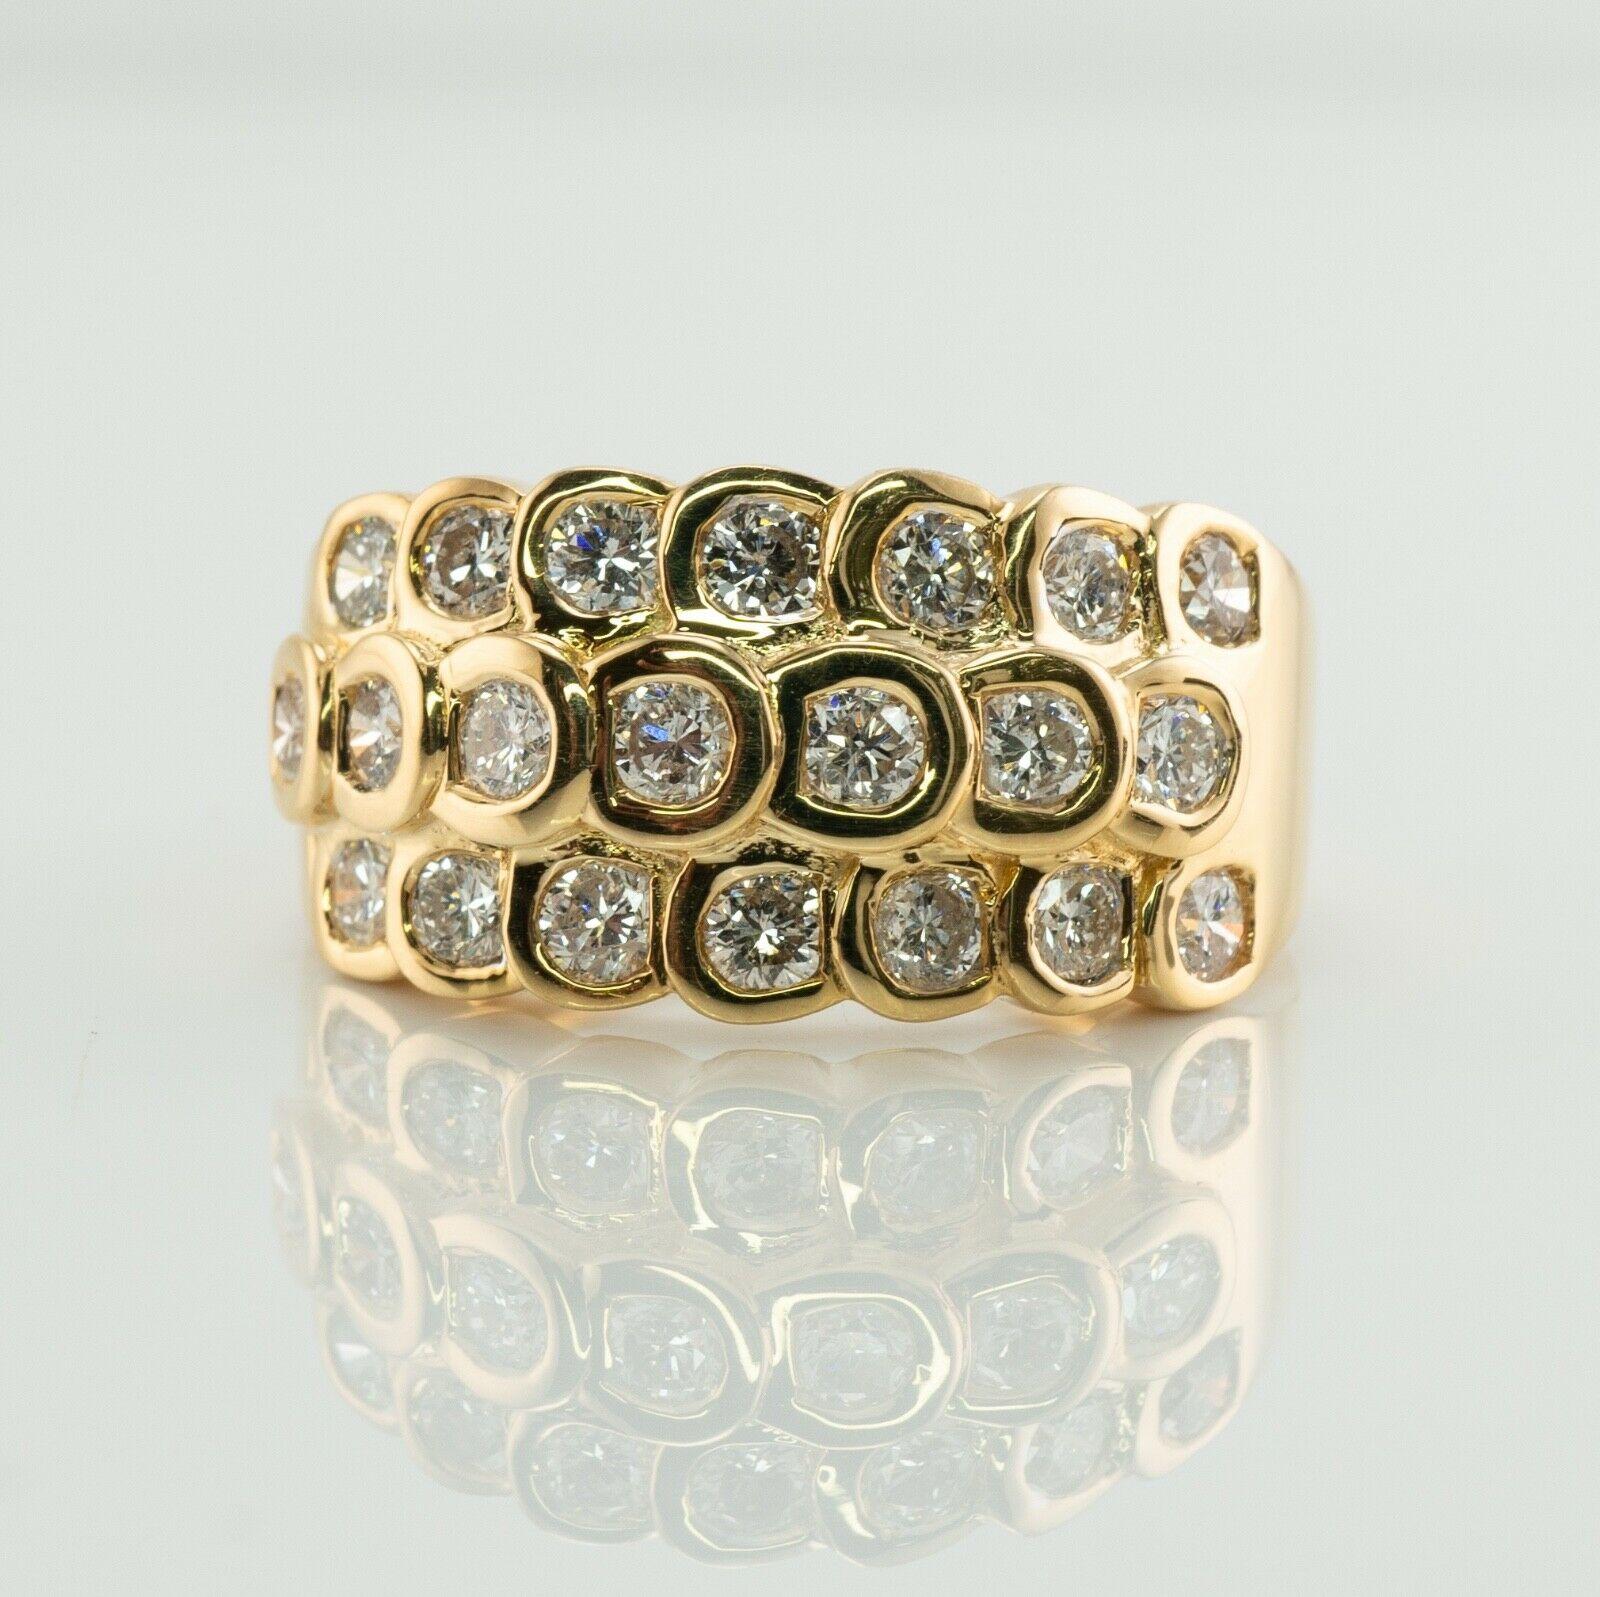 This estate ring is finely crafted in solid 18K Yellow Gold and set with genuine white and fiery diamonds. 
21 round brilliant cut diamonds totaling 1.47 carats of VS2 clarity and H color. 
The top of the ring measures 10mm North-South.
Size 6.5